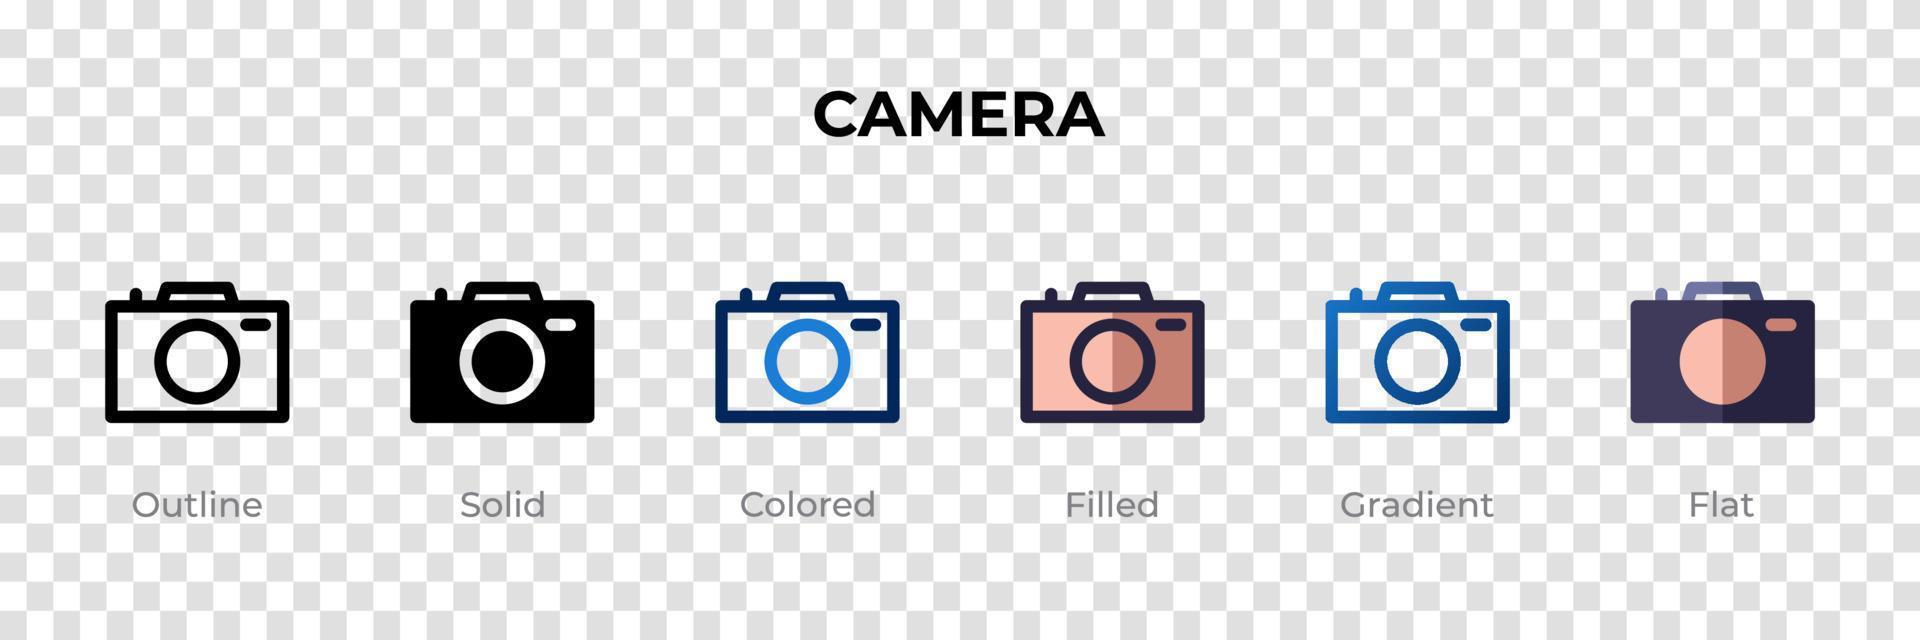 Camera icon in different style. Camera vector icons designed in outline, solid, colored, filled, gradient, and flat style. Symbol, logo illustration. Vector illustration